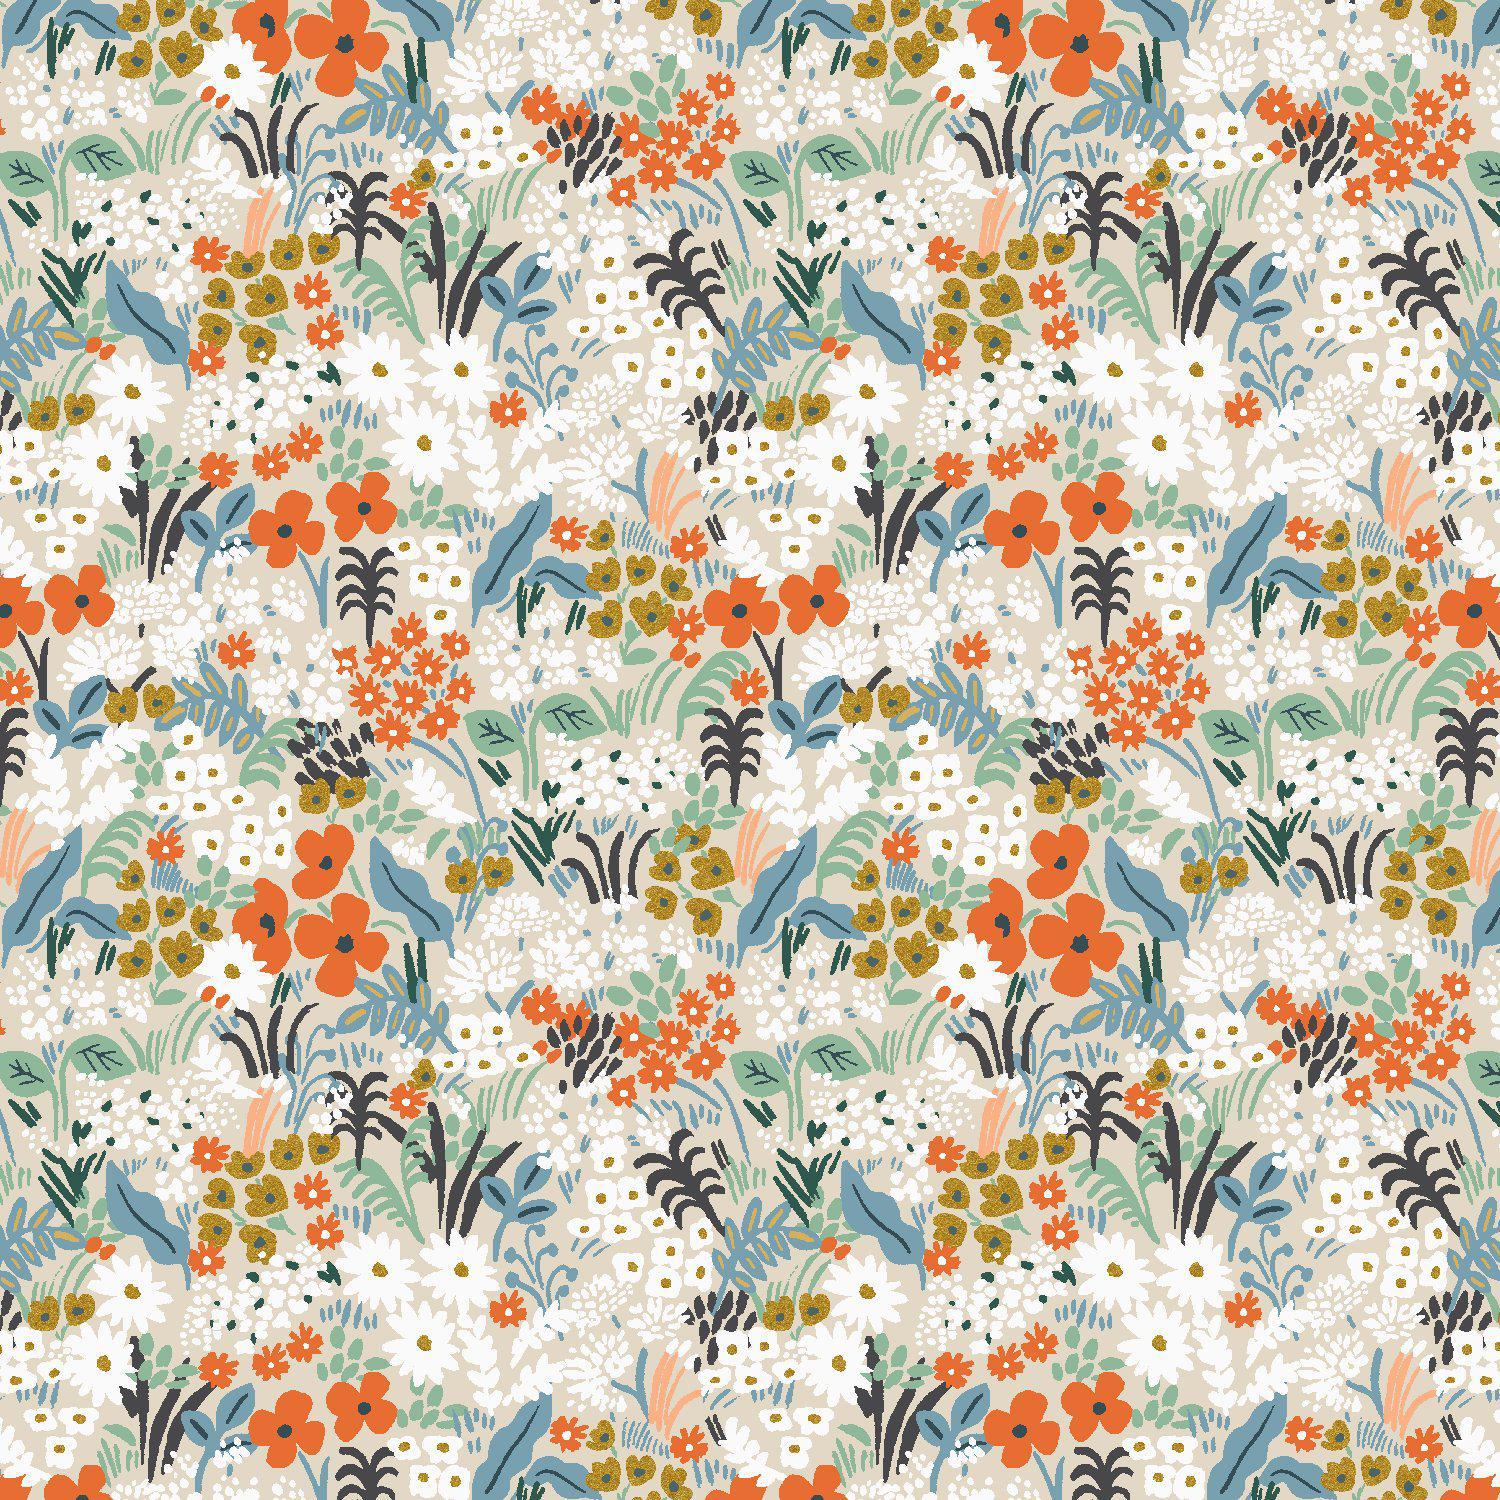 Cotton + Steel-Small Wildflower Floral Metallic Flax-fabric-gather here online